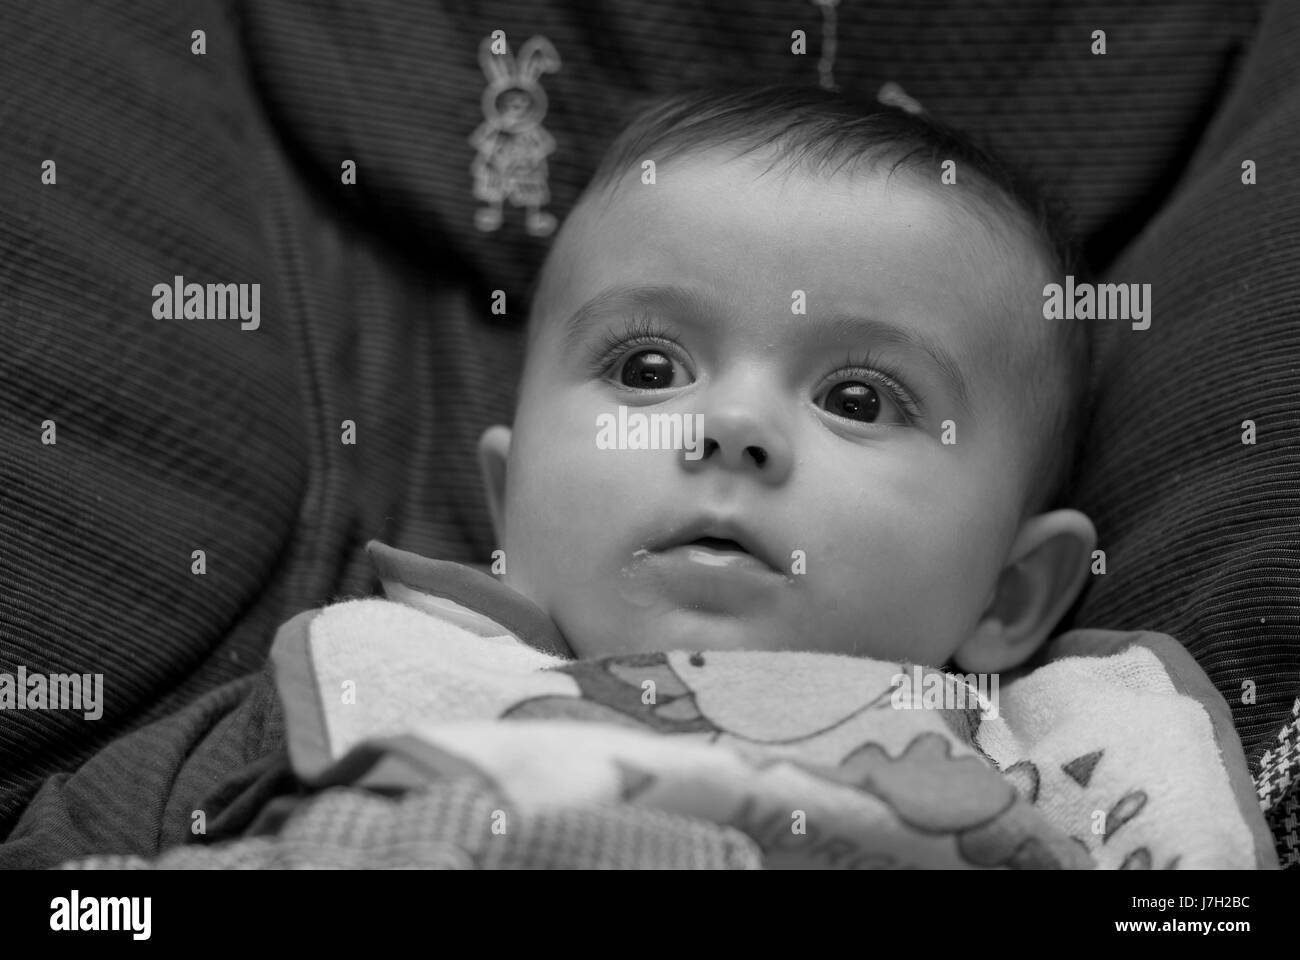 closeup blank european caucasian baby childhood delighted unambitious Stock Photo